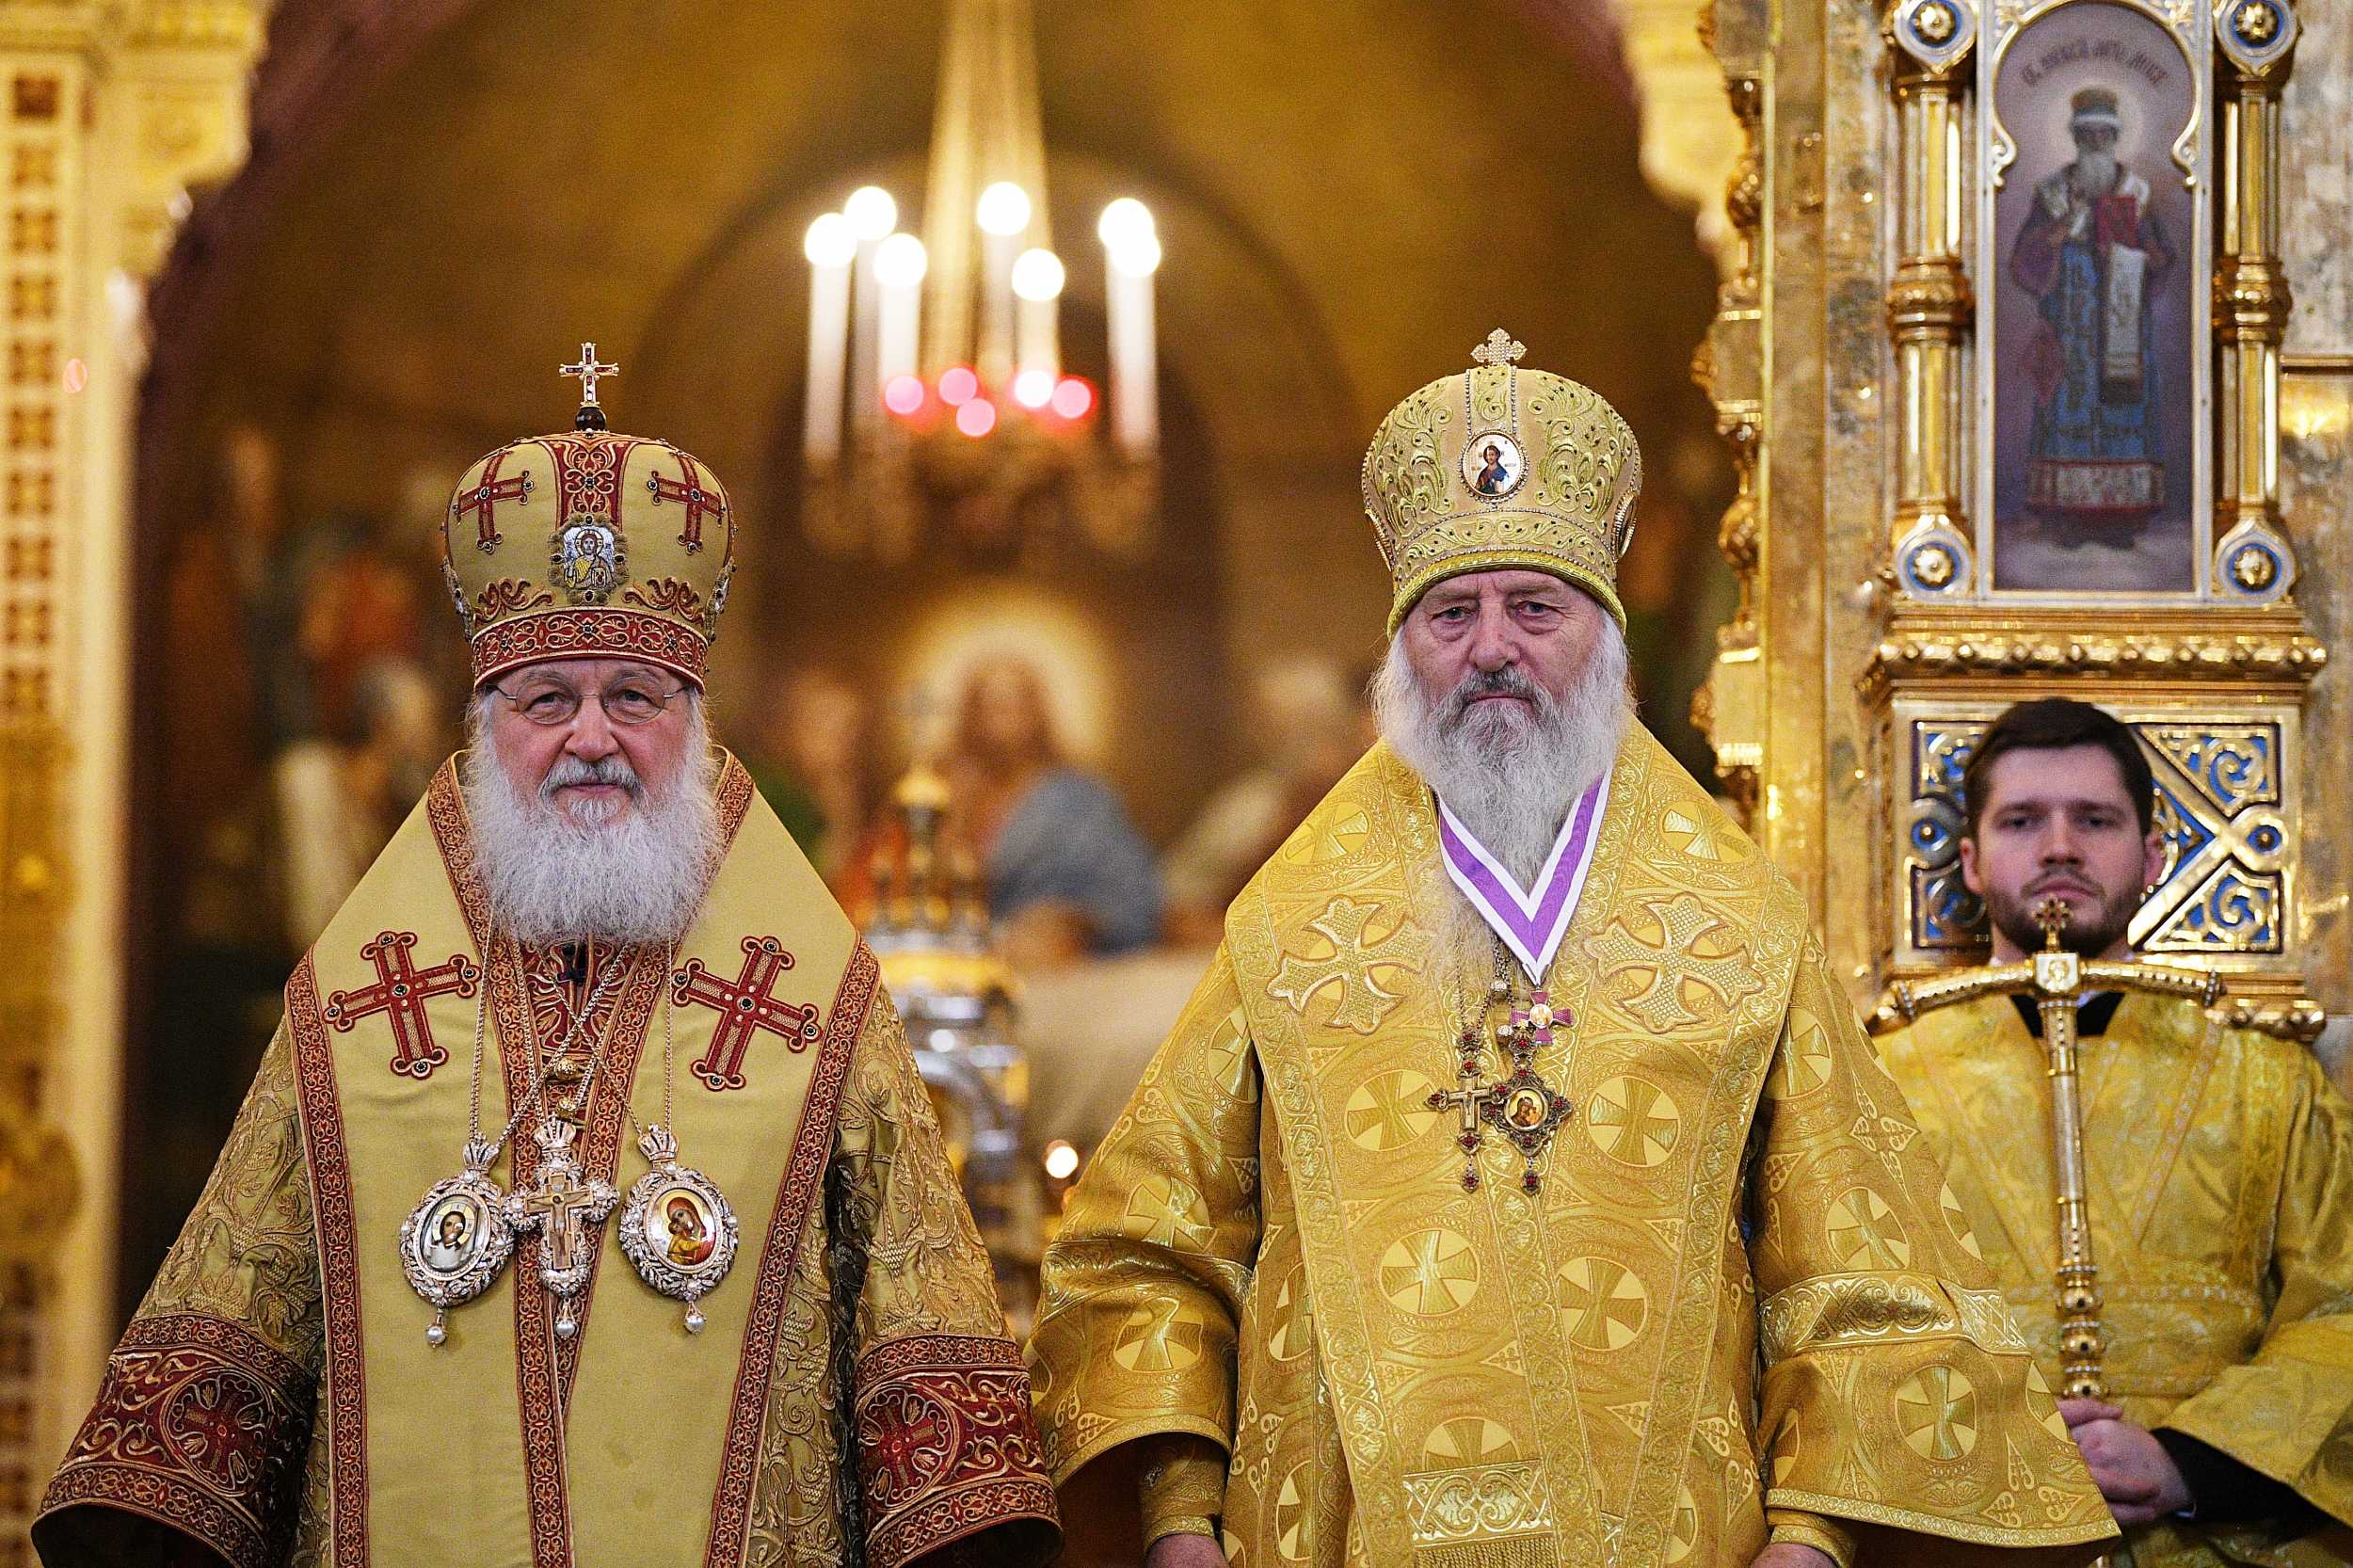 On the Sunday of the Triumph of Orthodoxy, the Primate of the Russian